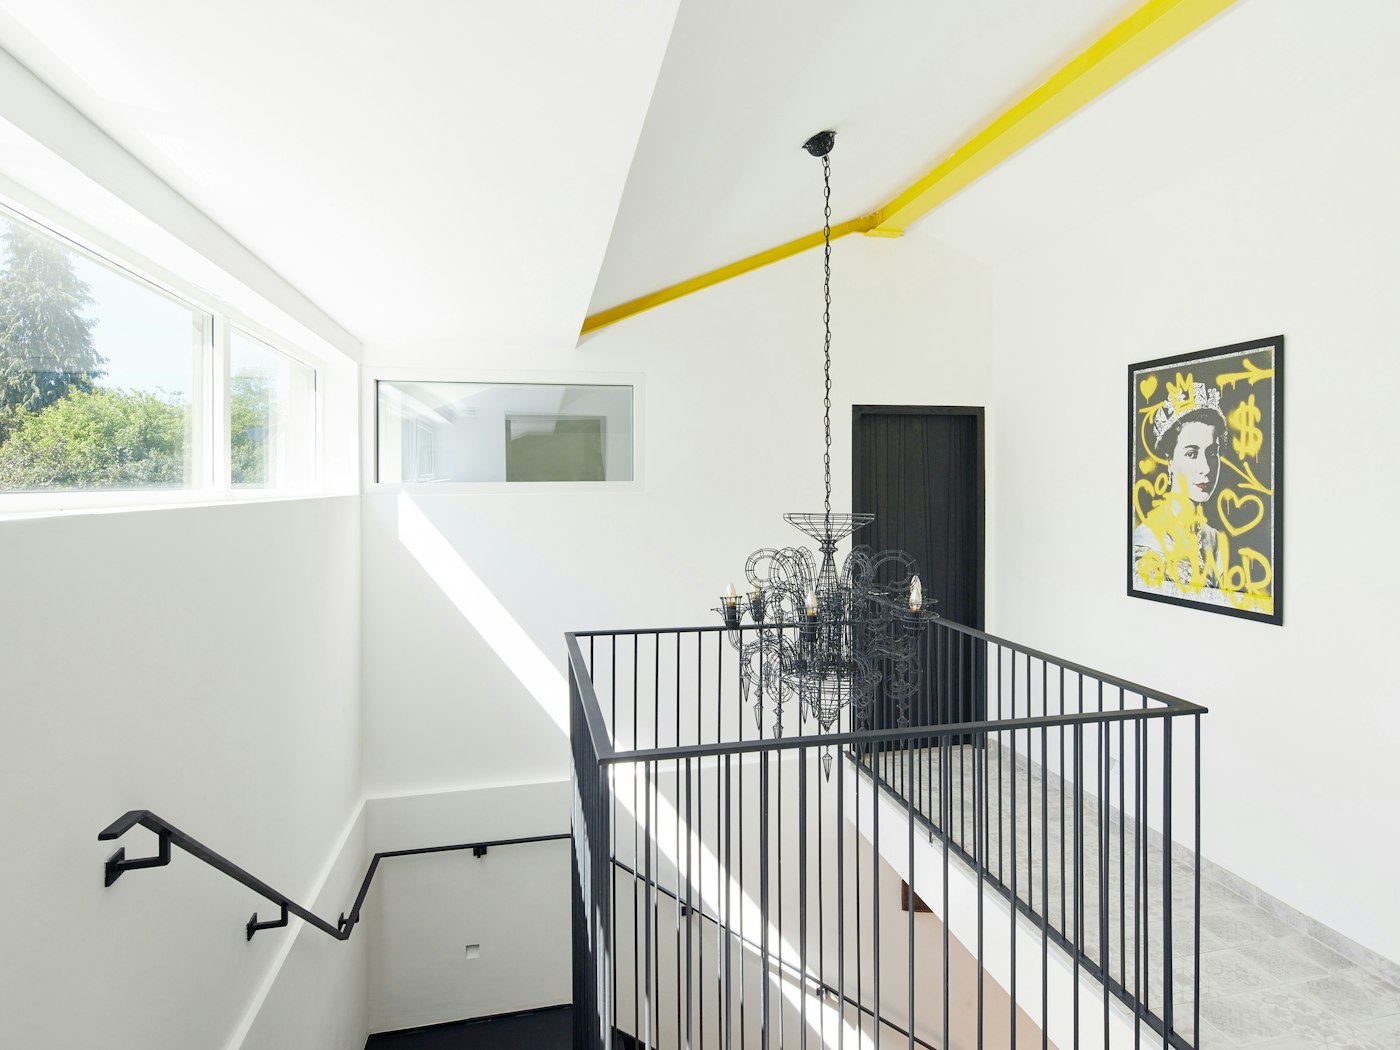 And those splashes of colour are dotted throughout with this yellow beam adding unique design interest to the new 2nd floor 